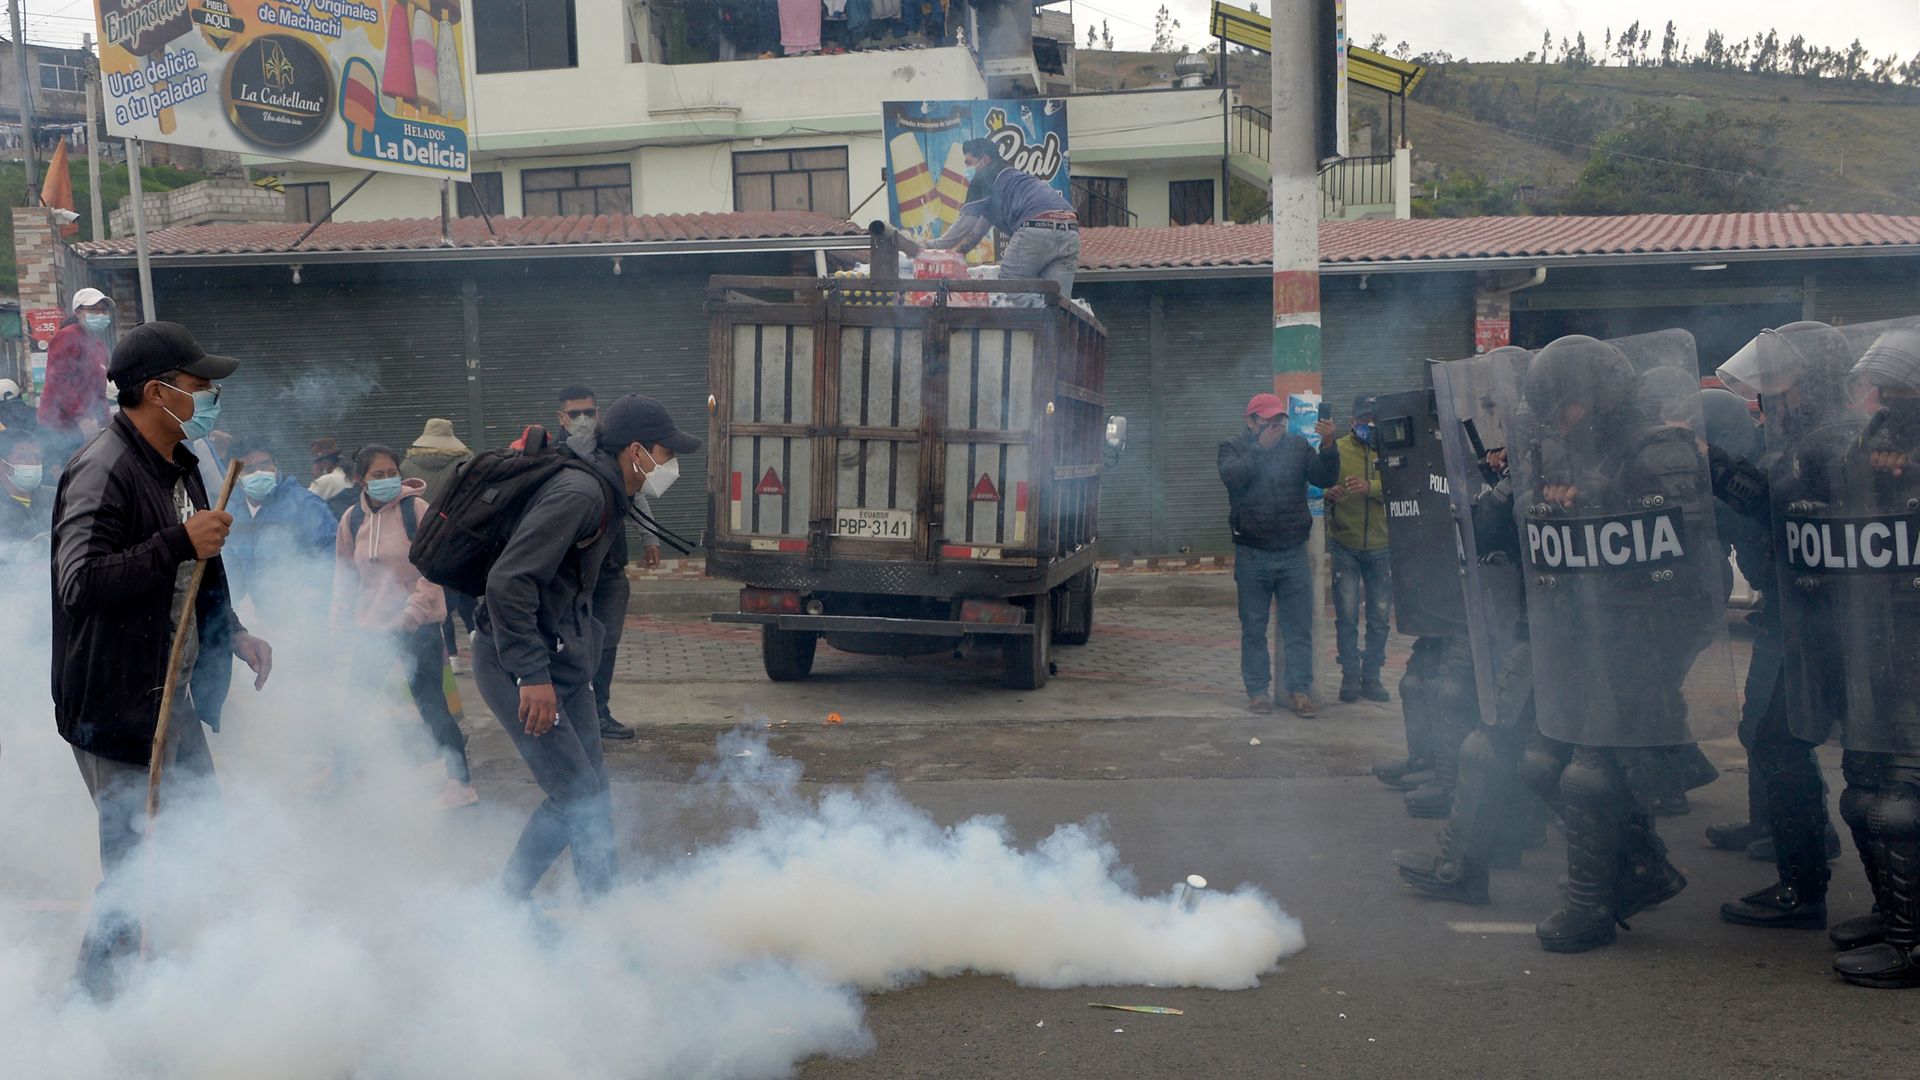 Demonstrators and police clash in Cotopaxi Province, Ecuador, during a protest.